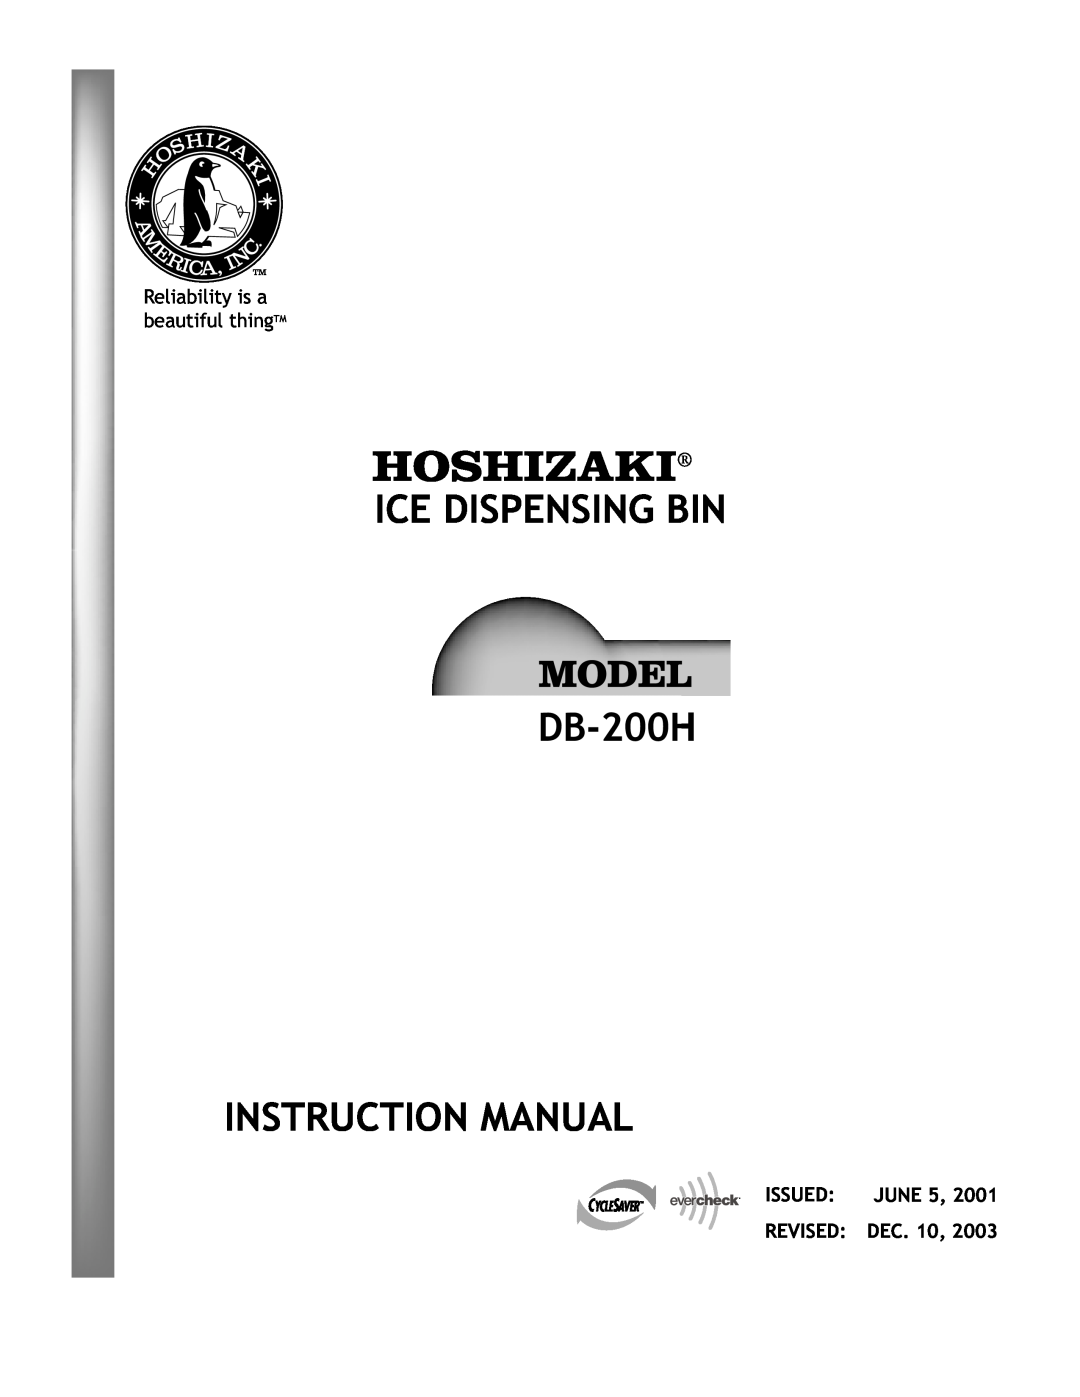 Hoshizaki DB-200H instruction manual Reliability is a beautiful thingTM, Issued, June, 2001, Revised, 2003, Dec 